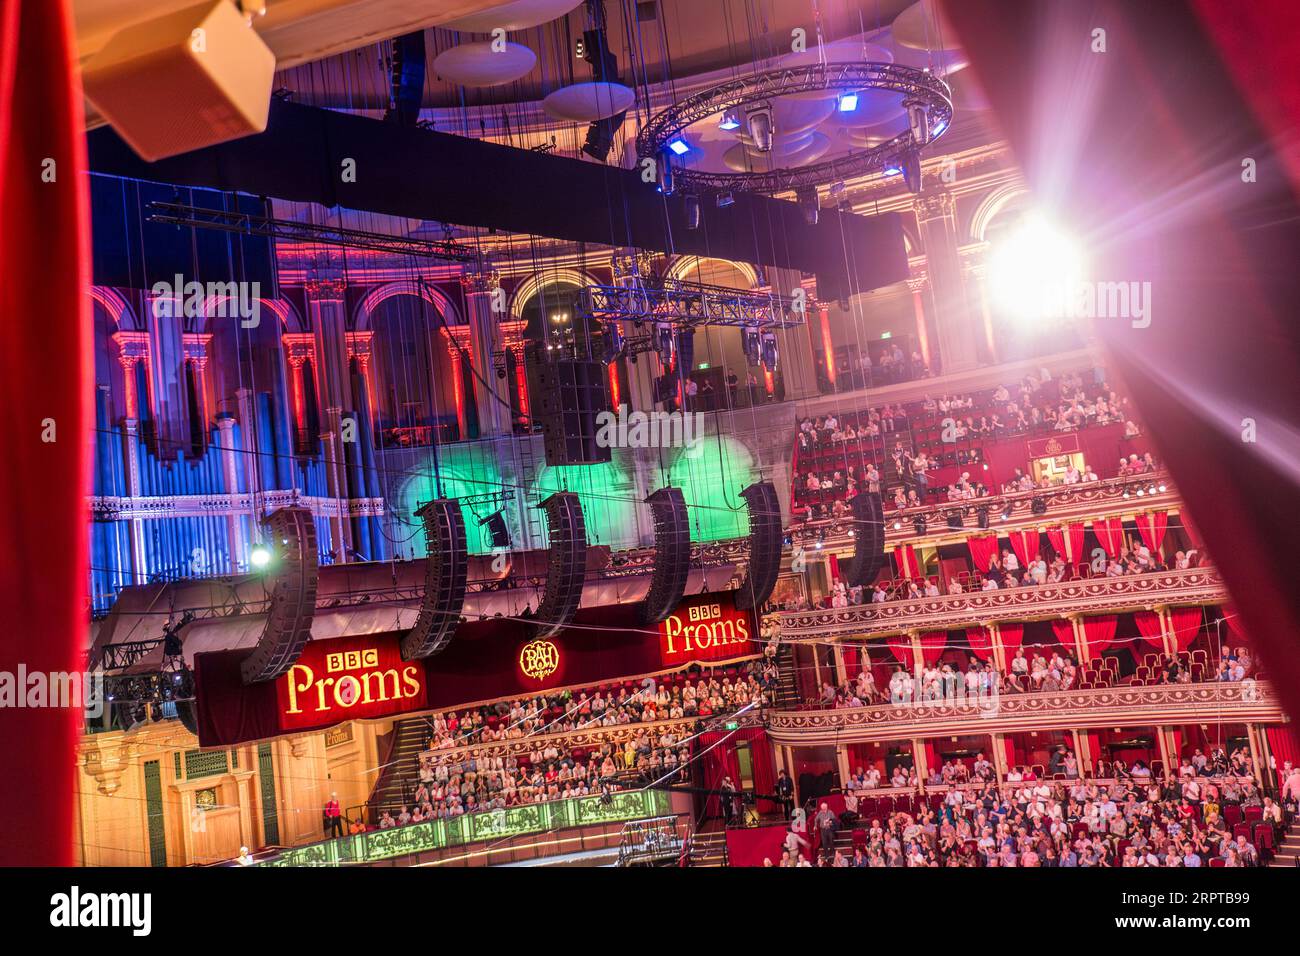 ALBERT HALL PROMS CONCERT PERFORMANCE  INTERIOR OPENING UNVEILING SHOWTIME WITH BBC PROMS SIGNS viewed through red velvet curtains of private box with television lights flaring to the auditorium, audience and stage. Royal Albert Hall, Kensington Gore, Kensington, London, United Kingdom Stock Photo